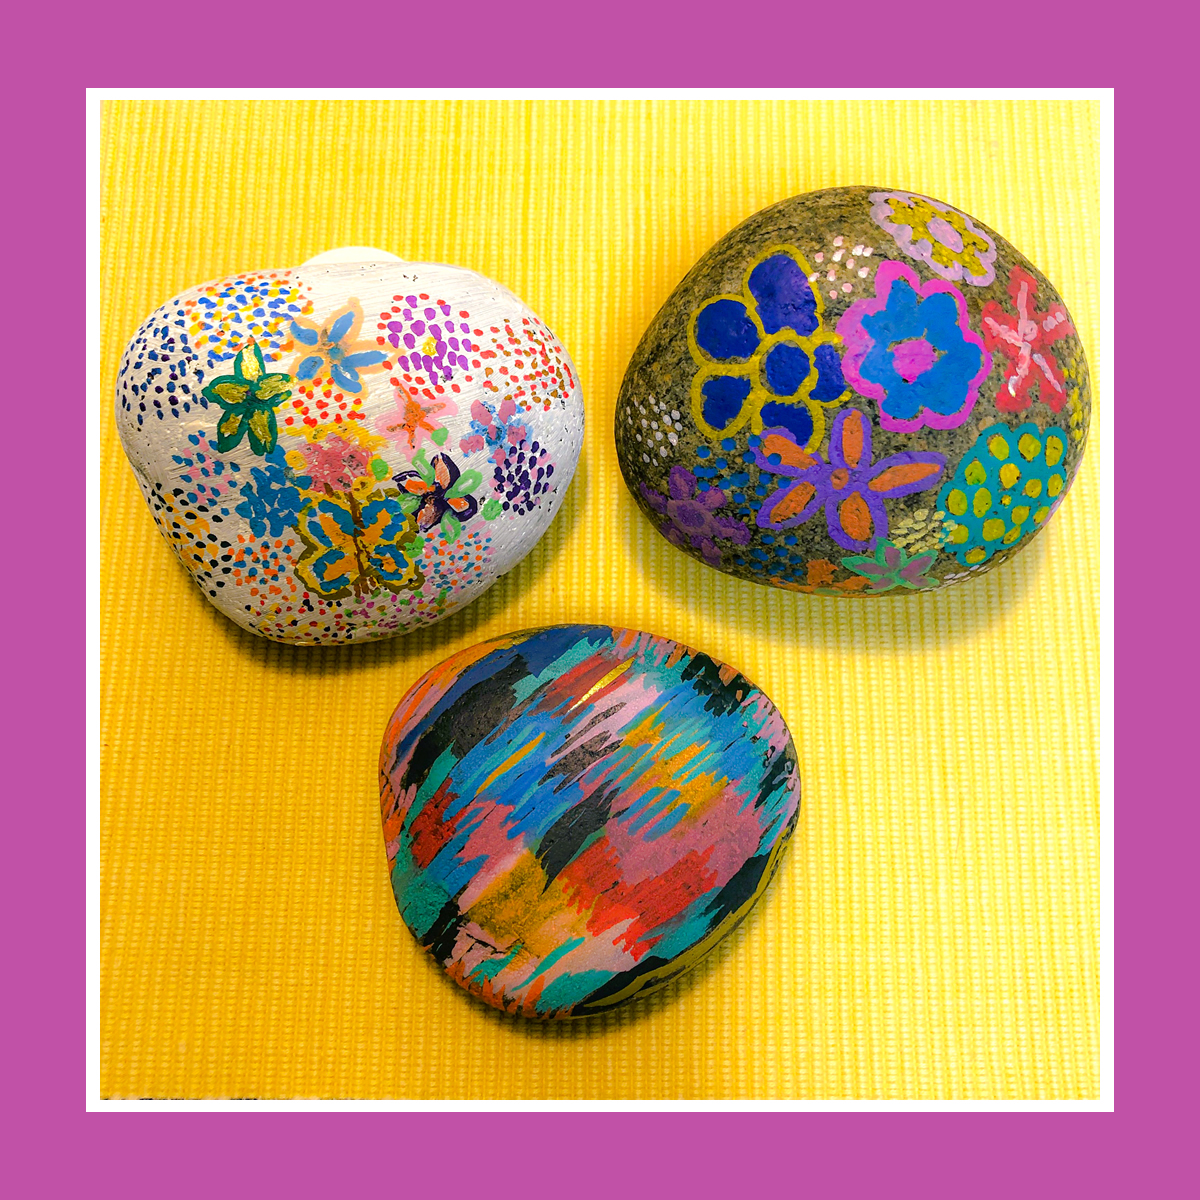 TED ART rock painting for graves disease awareness month to include thyroid eye disease